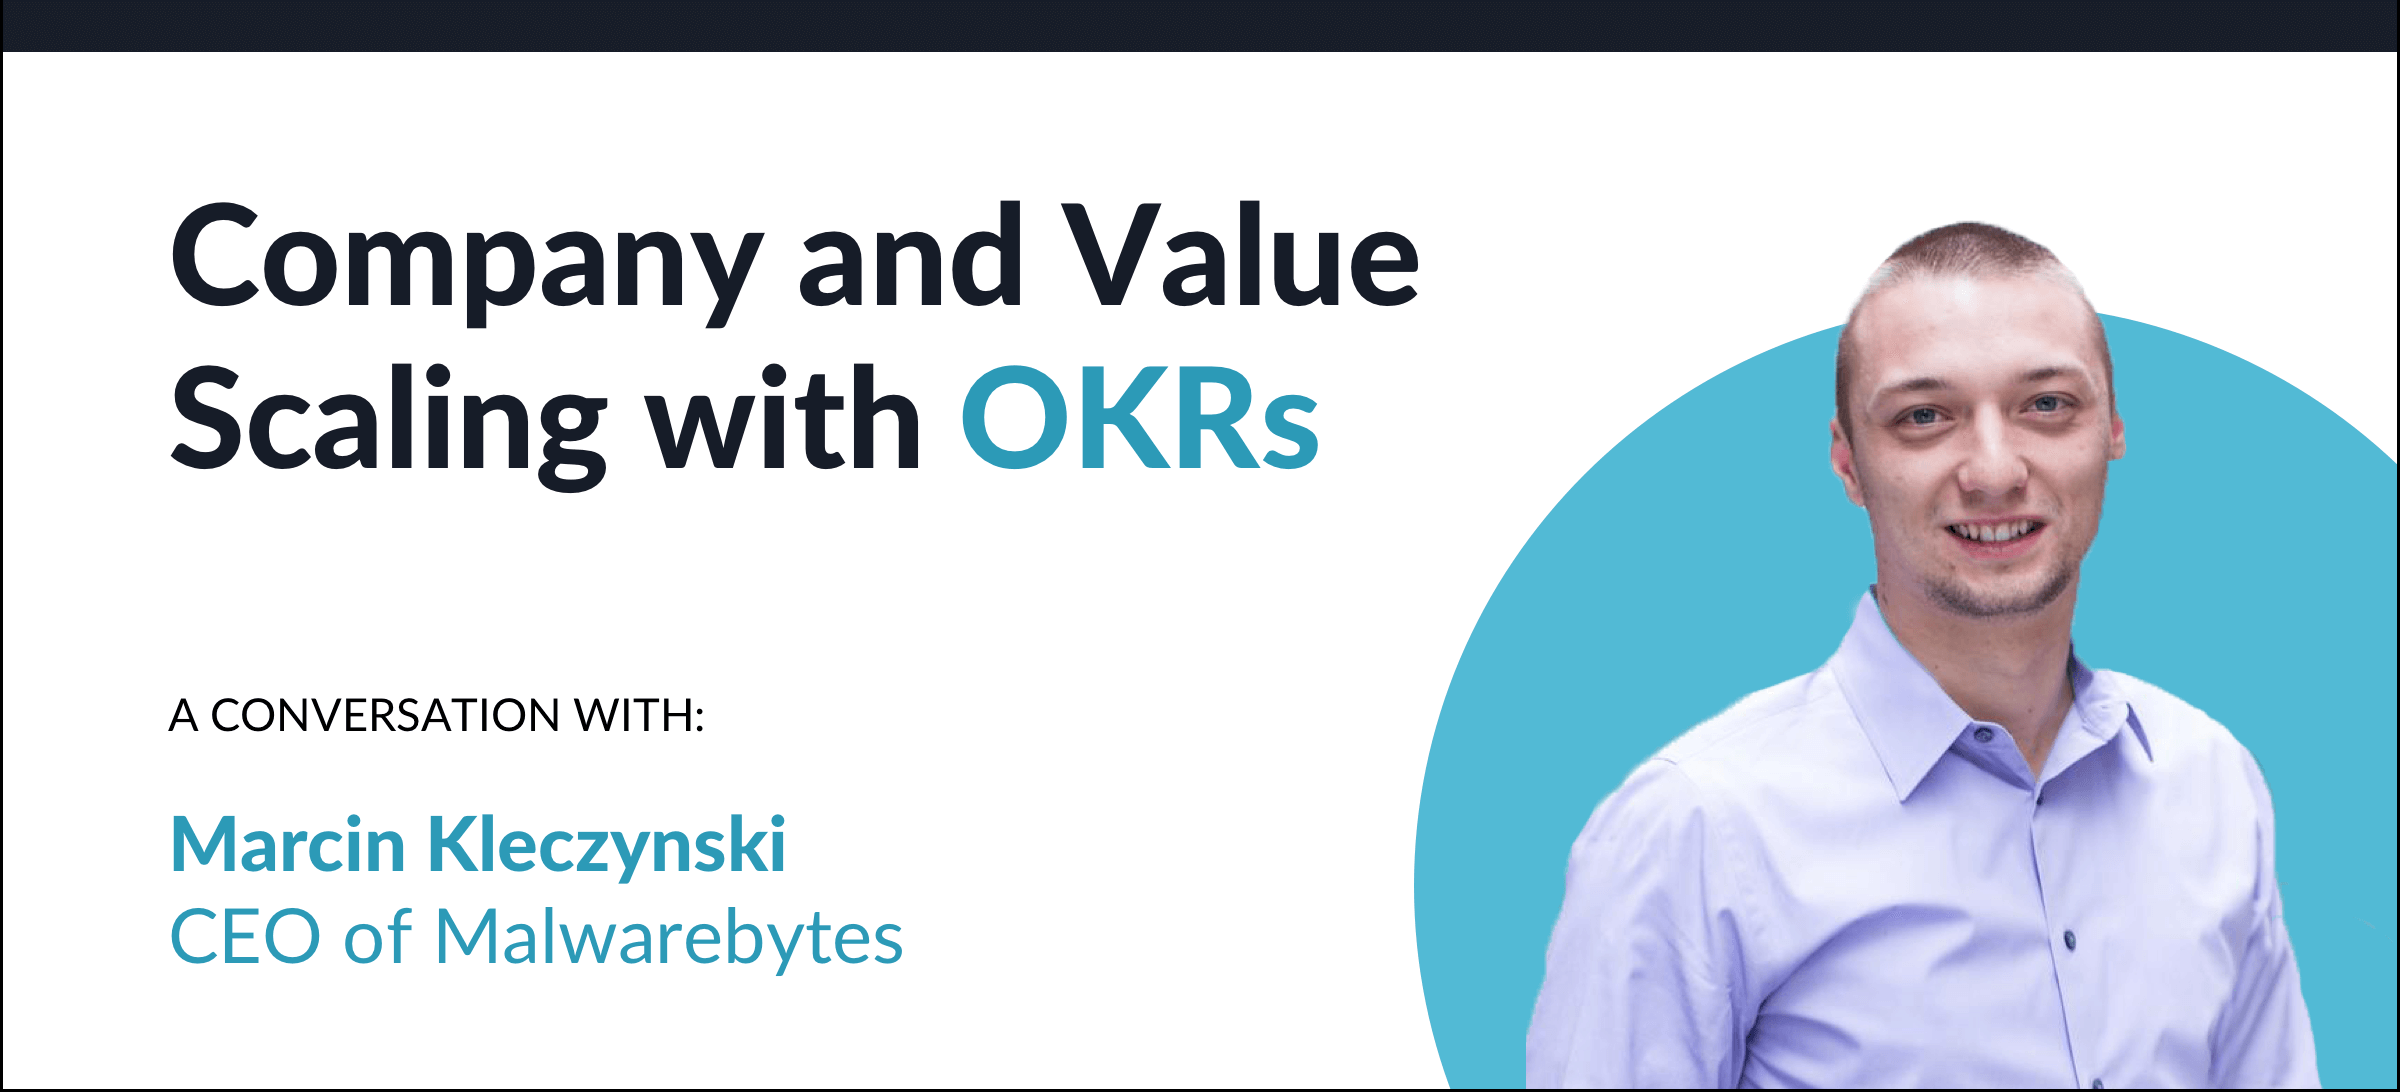 Company and Value Scaling with OKRs